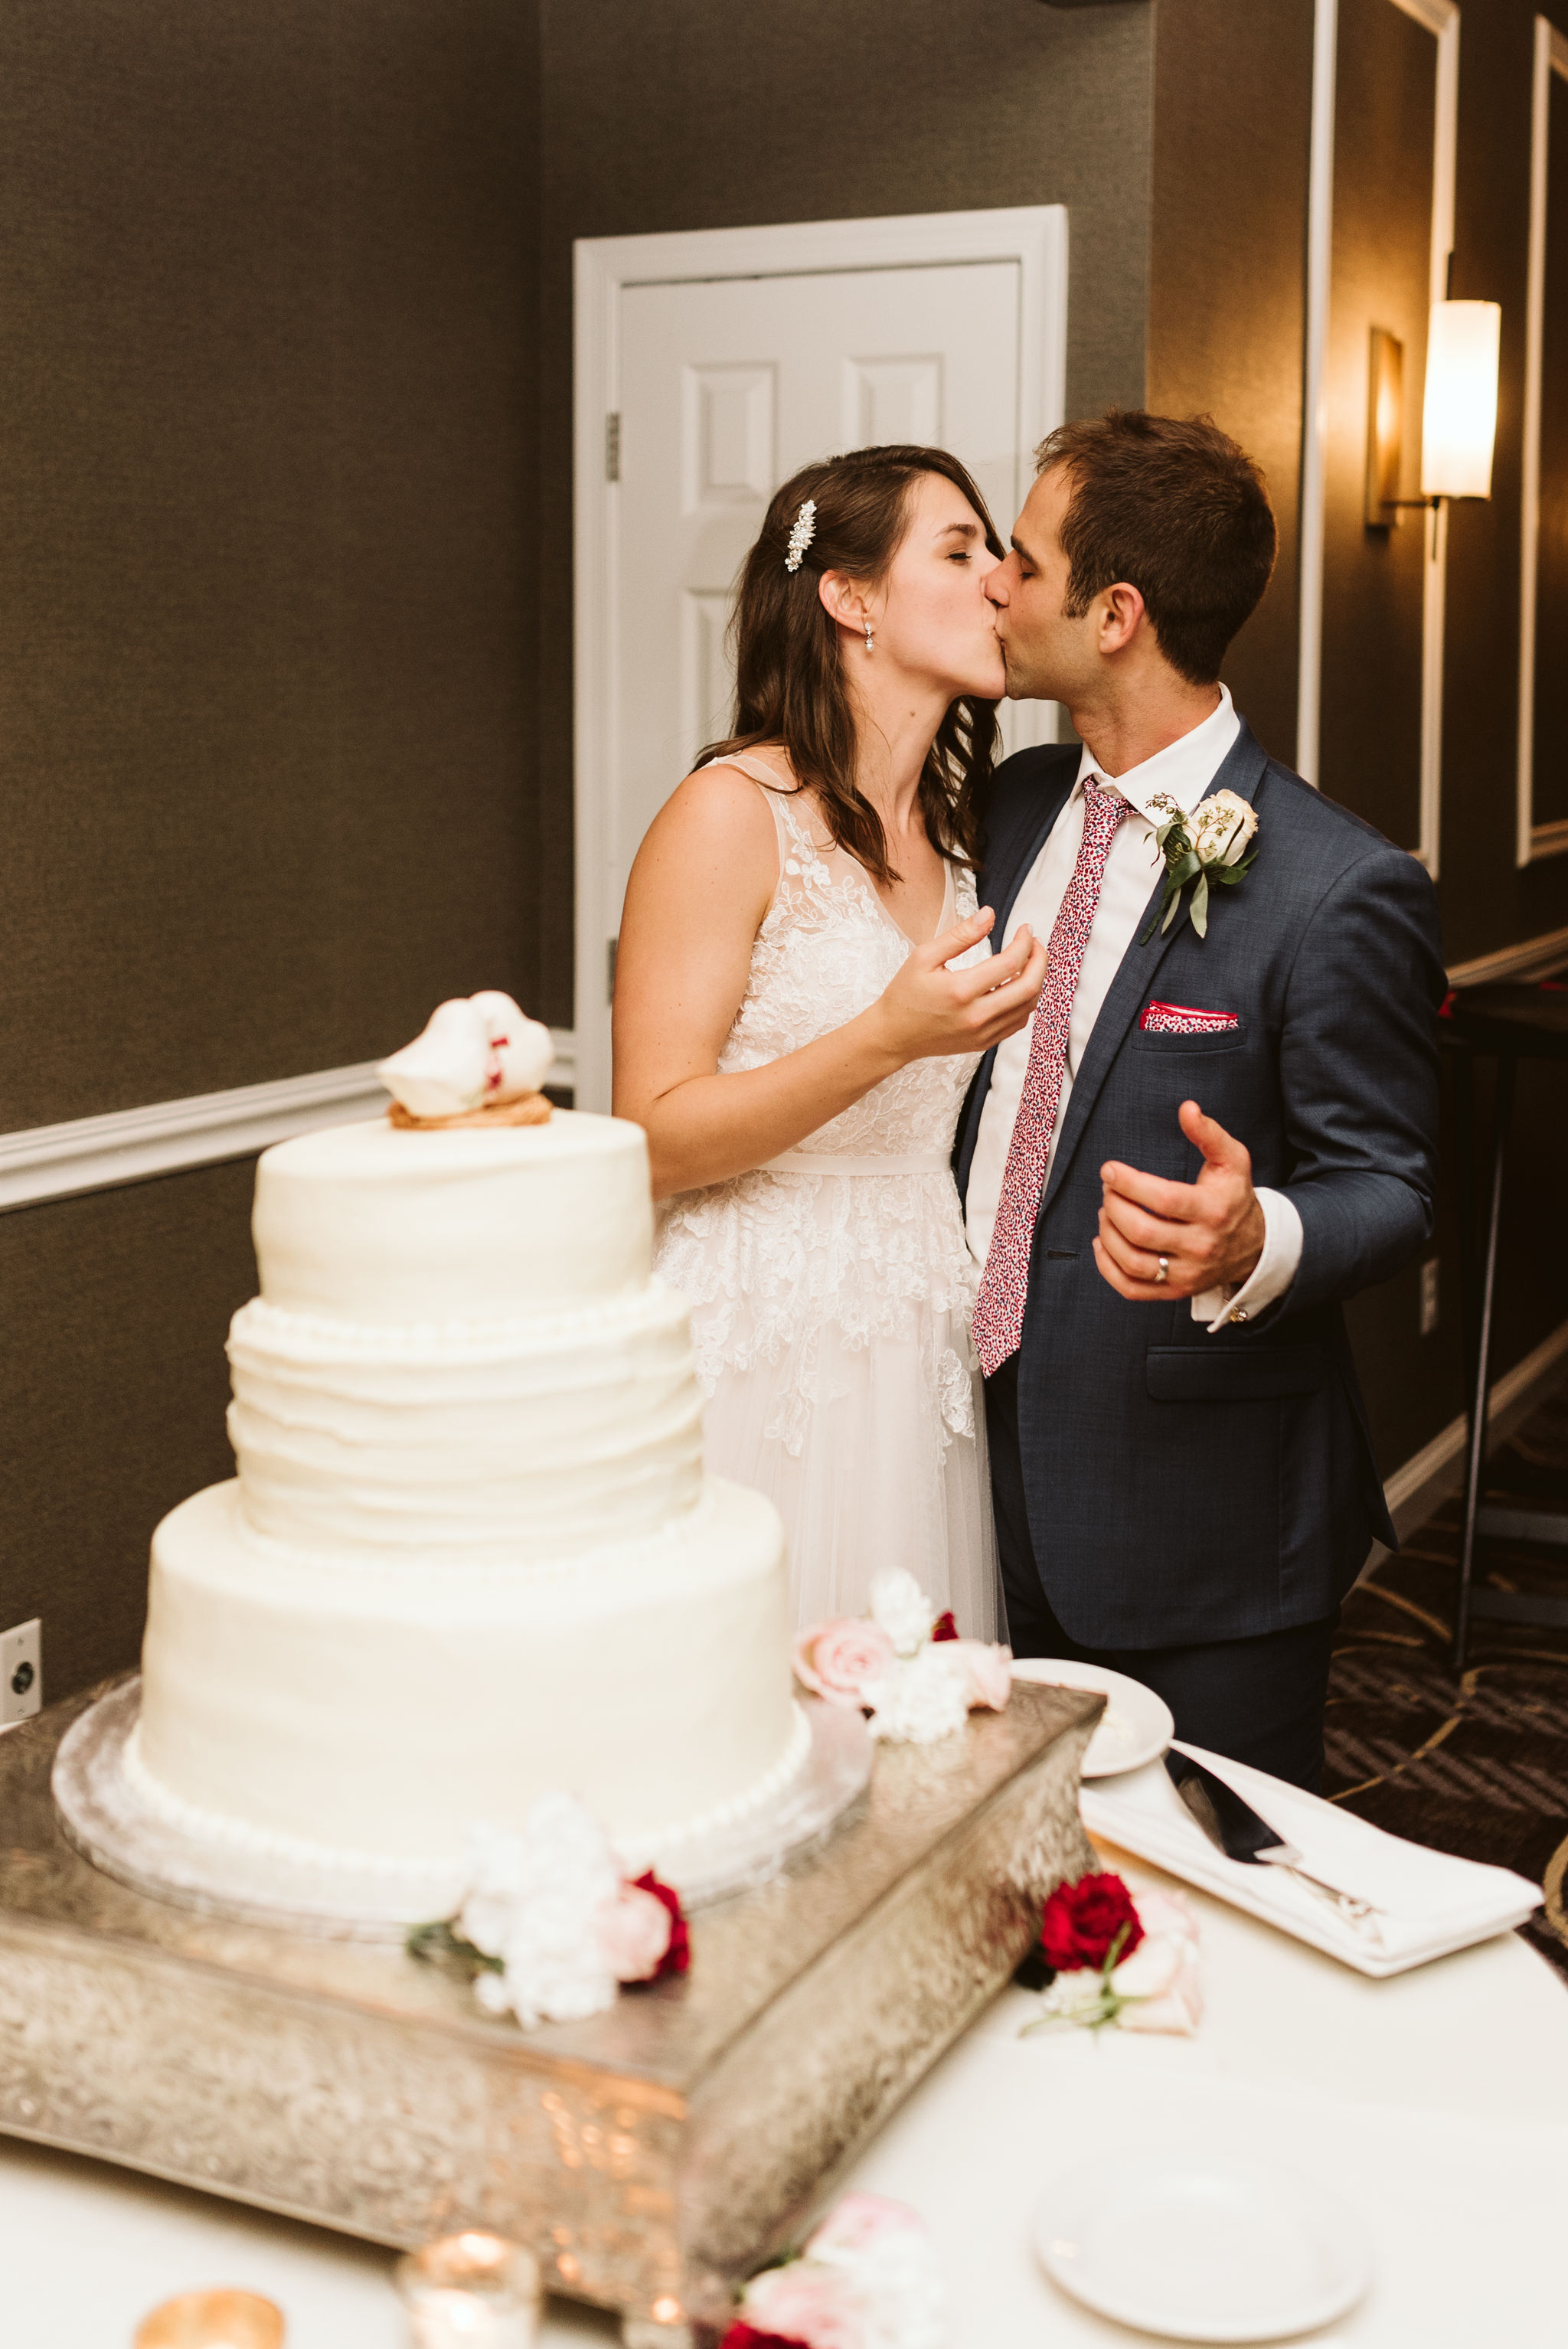  Phoenix Maryland, Baltimore Wedding Photographer, Eagle’s Nest Country Club, Classic, Romantic, Bride and Groom Kissing After Cutting the Cake, Graul’s Market Cake, 